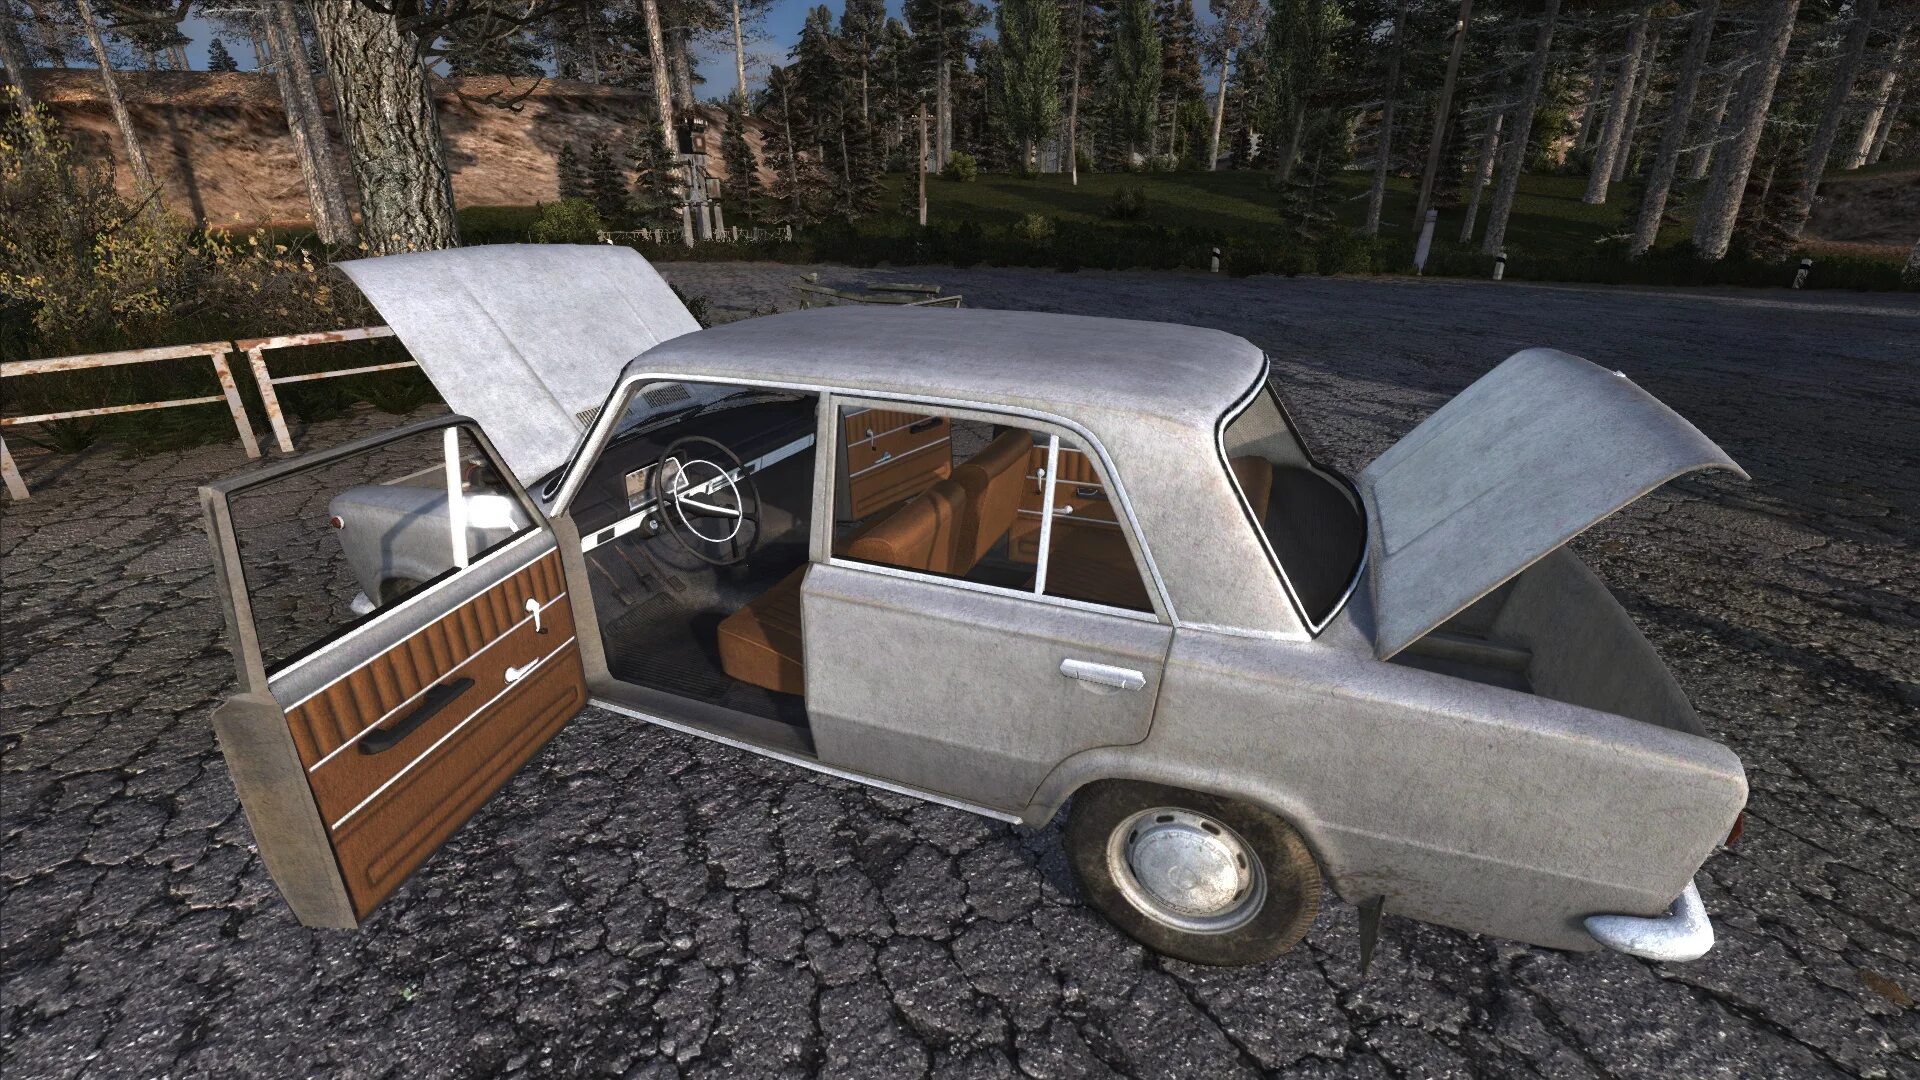 Definitive car pack addon. Дефинитив кар пак аддон. Definitive car Pack Lost. Сталкера Definitive car Pack.